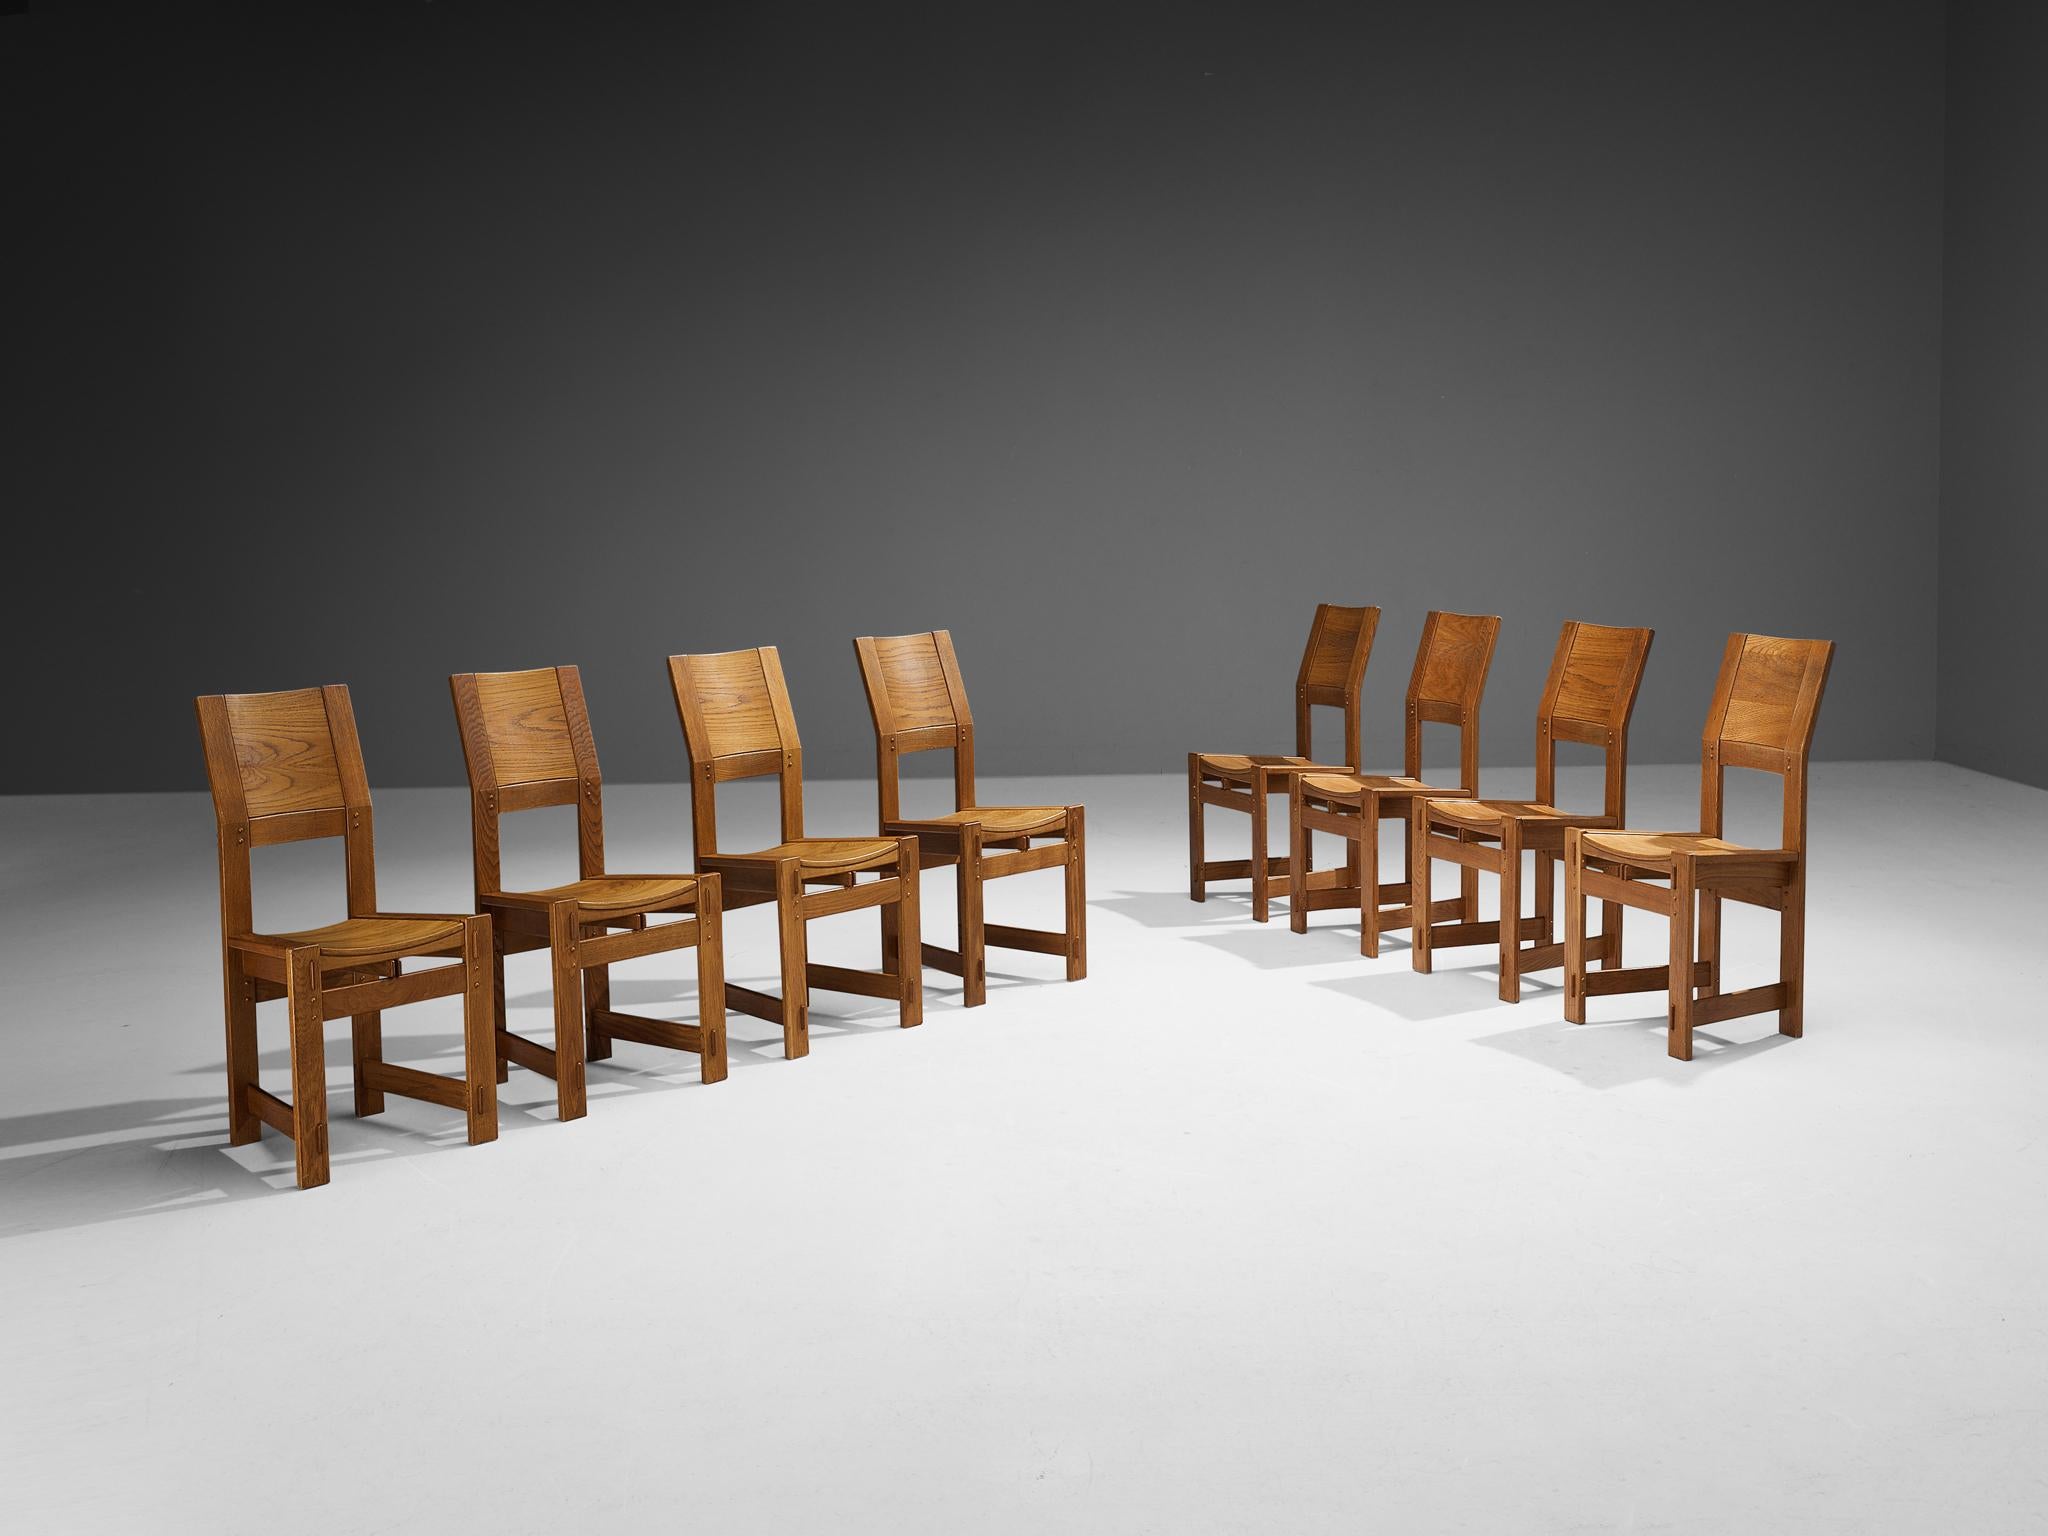 Giuseppe Rivadossi for Officina Rivadossi, set of eight dining chairs, oak, Italy, circa 1980

An exceptional set of chairs by the Italian sculptor and designer Giuseppe Rivadossi, featuring a high level of craftsmanship in woodwork. The chairs are